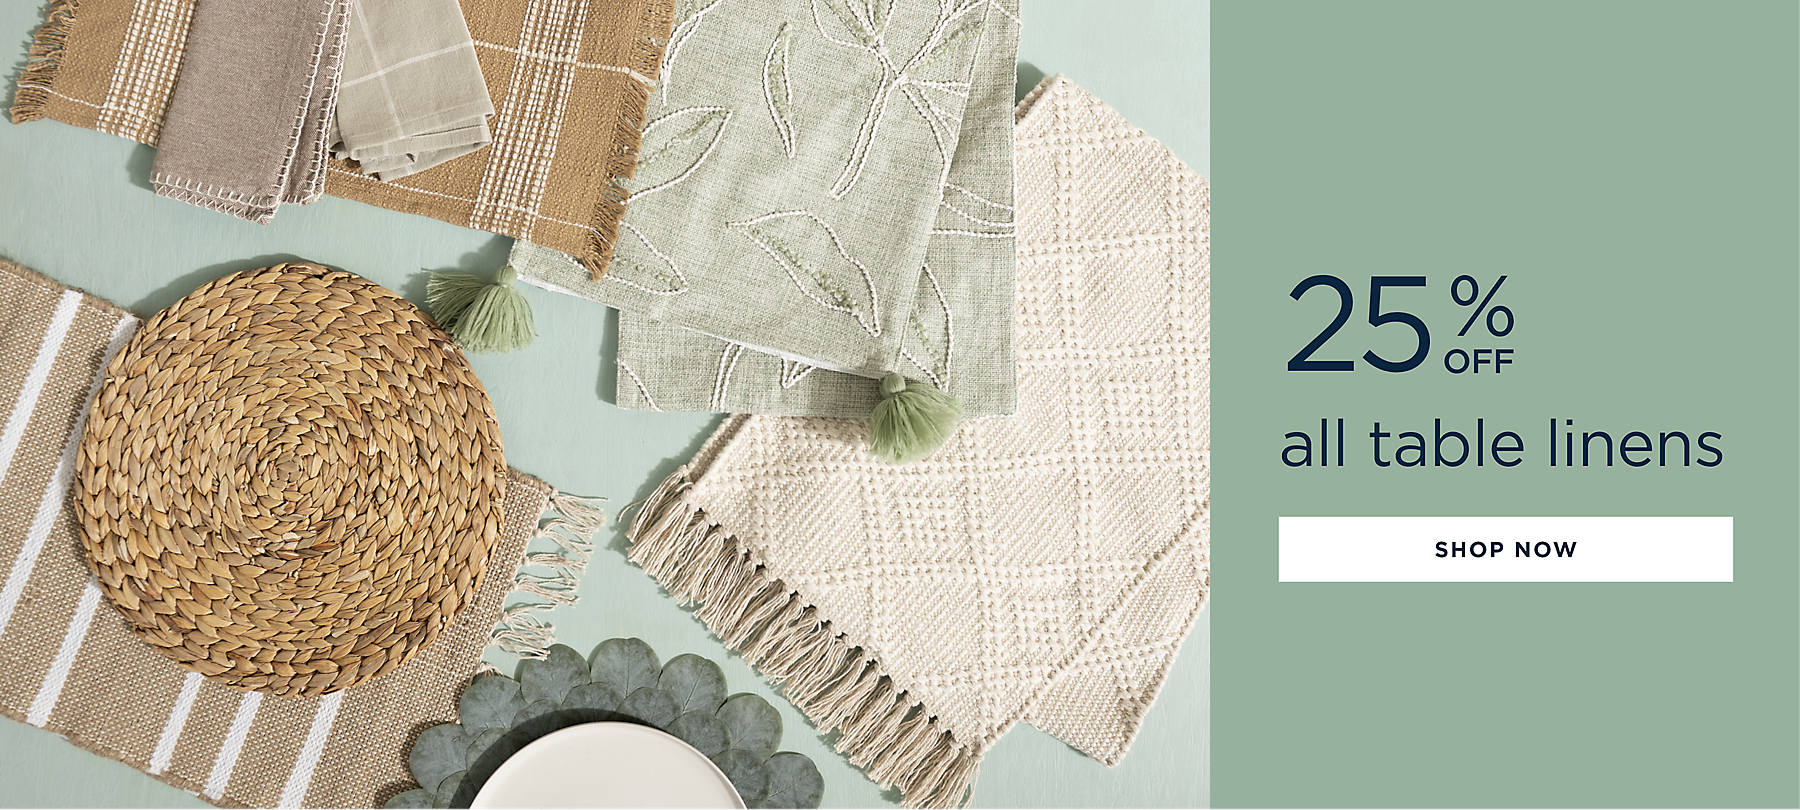 all table linens 25% off shop now